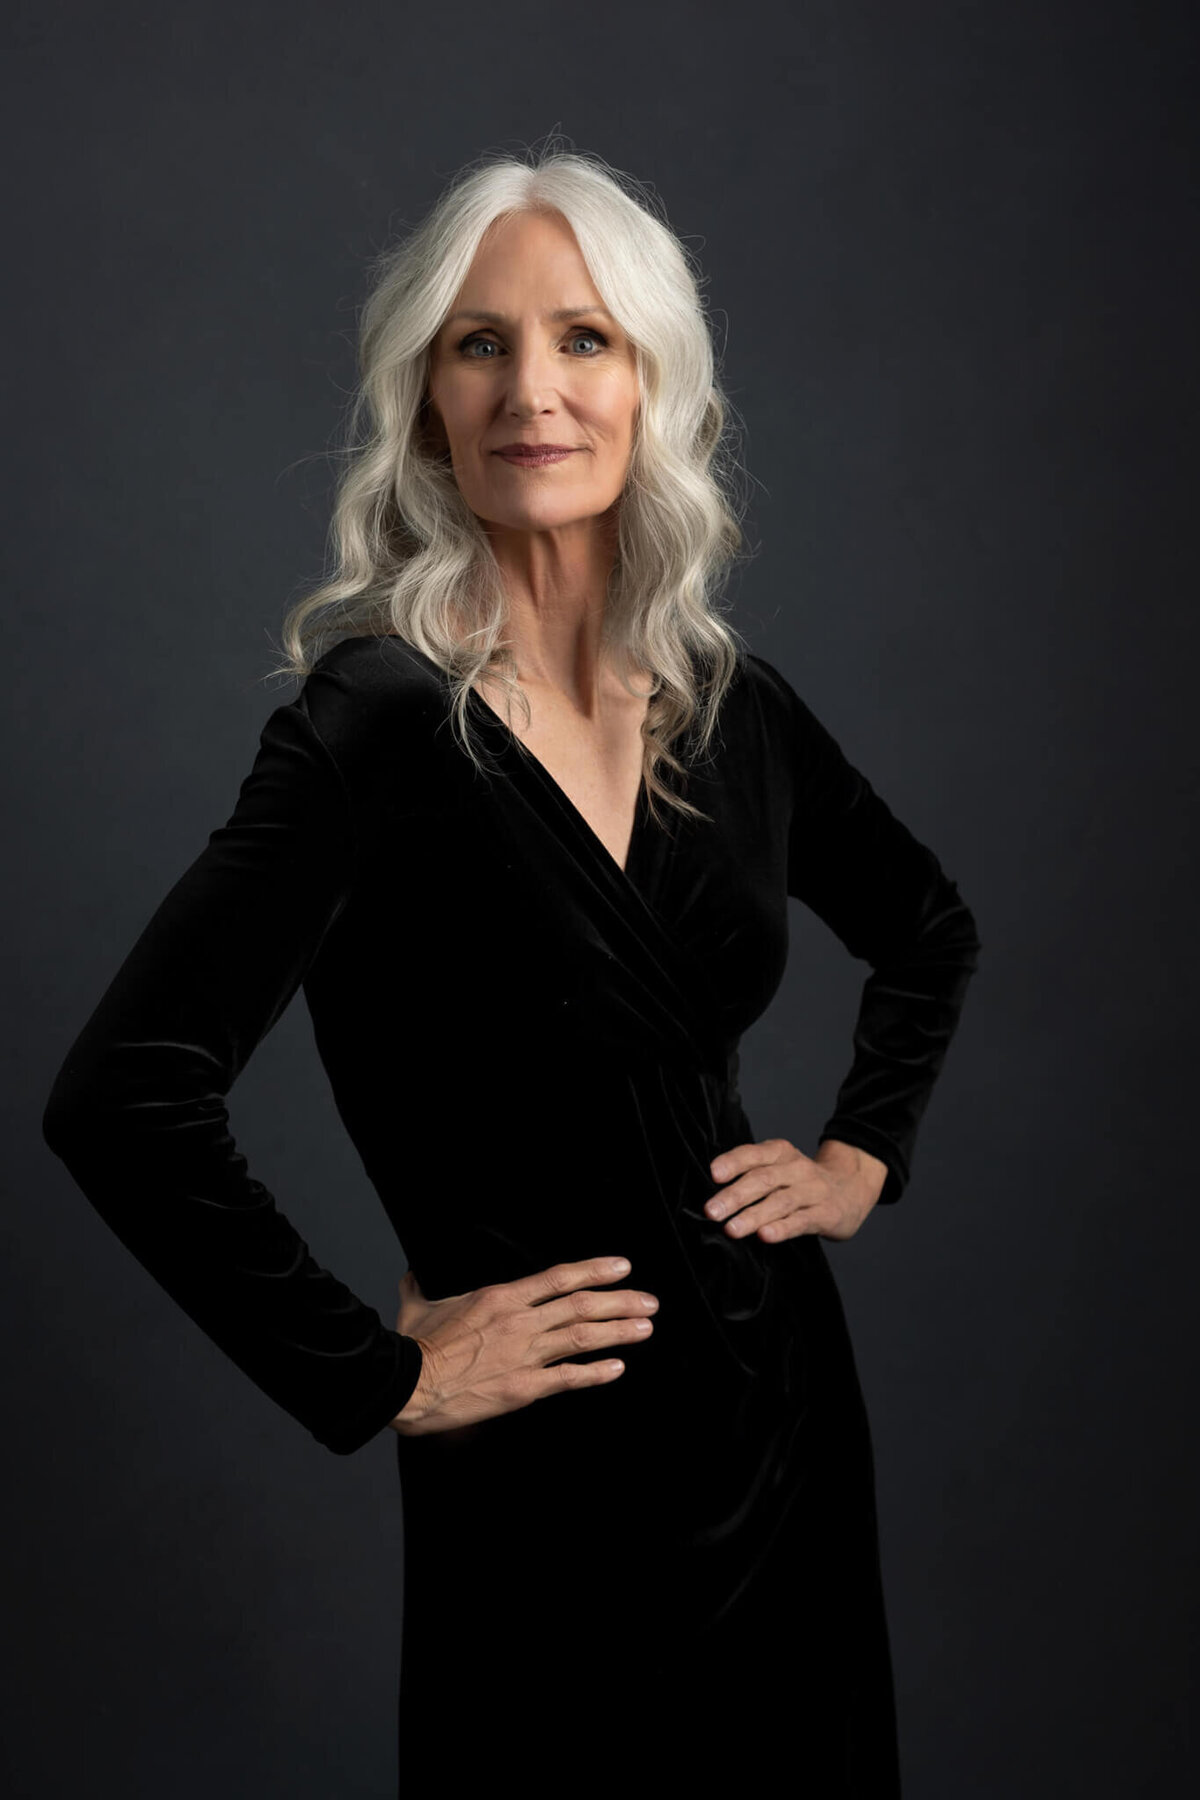 woman over 50 is having a photoshoot to celebrate her age